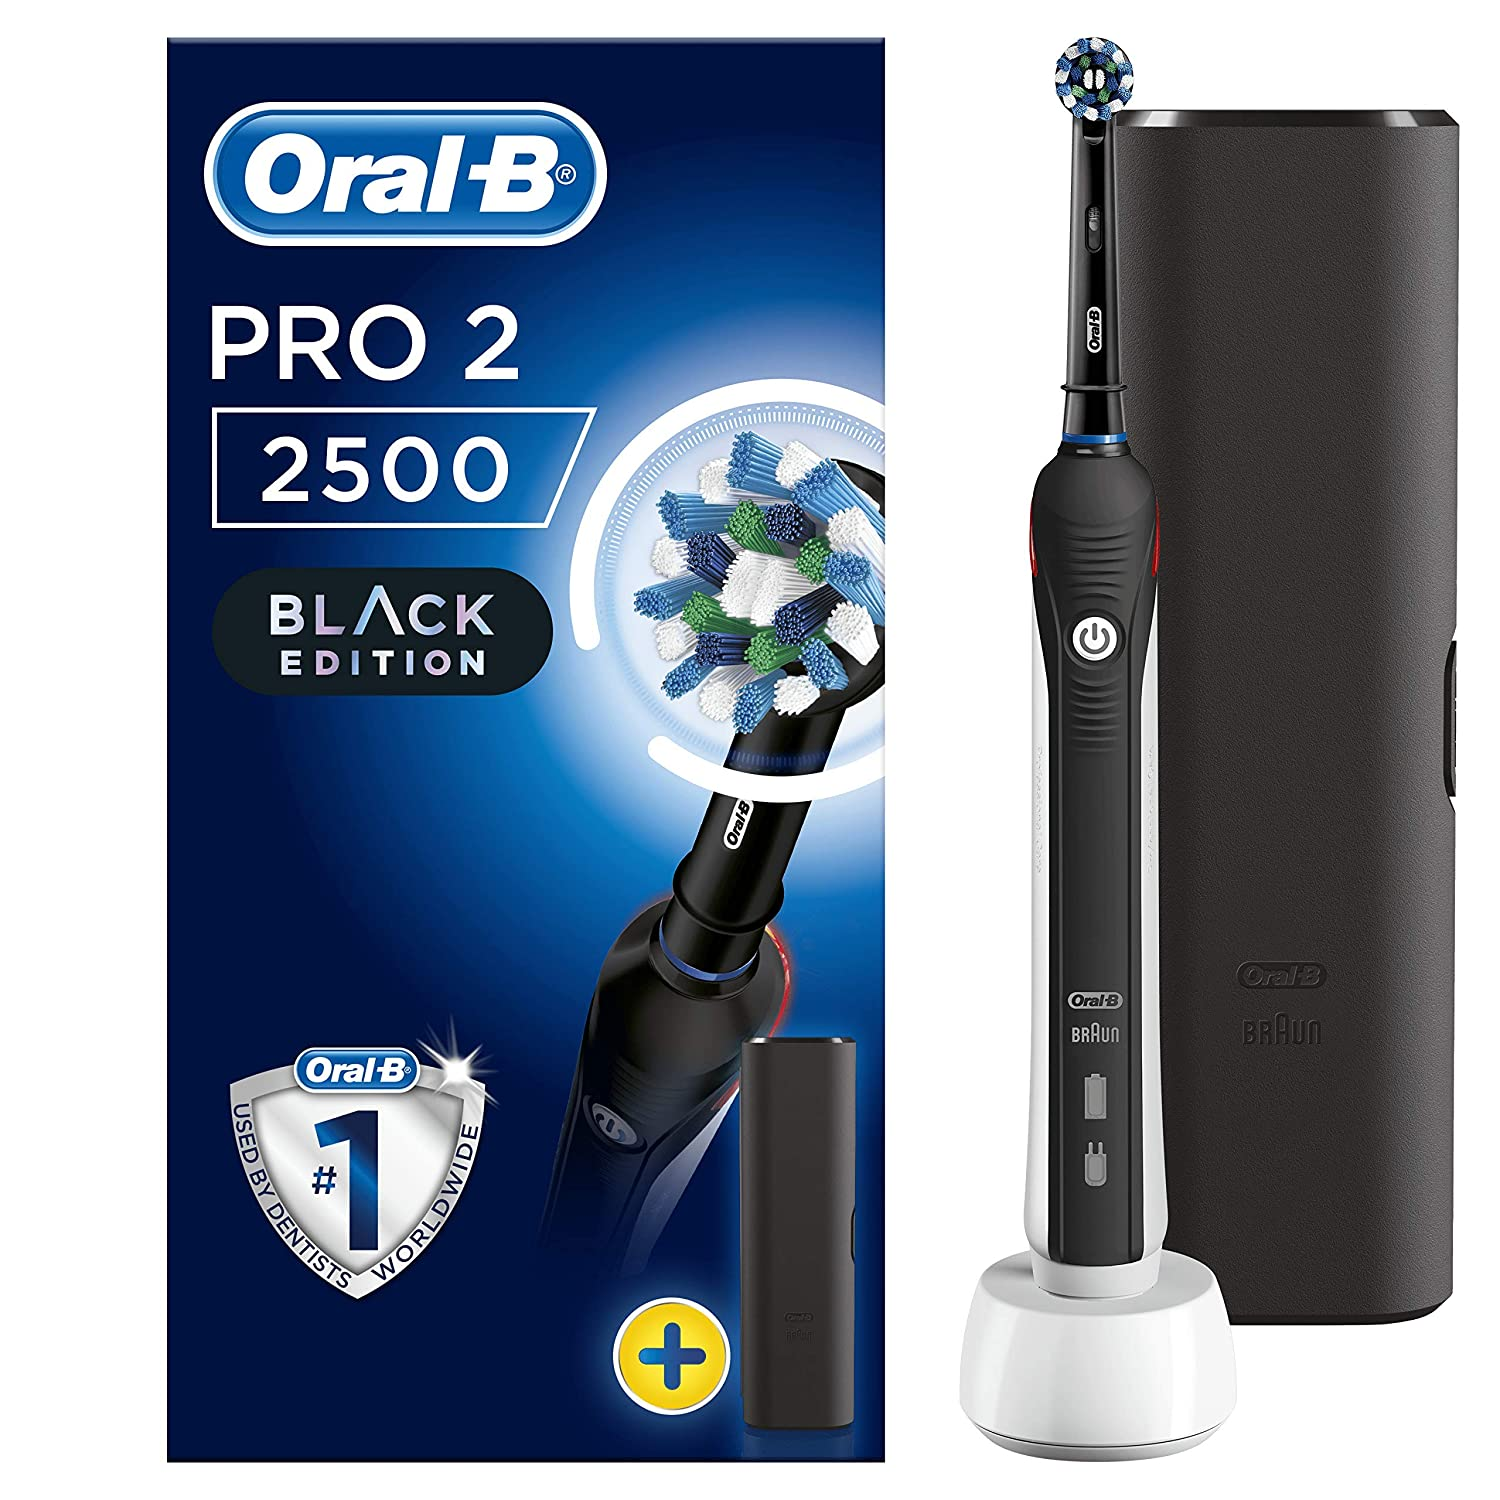 Oral B Pro 2 2500 Electric Toothbrush Wholesale